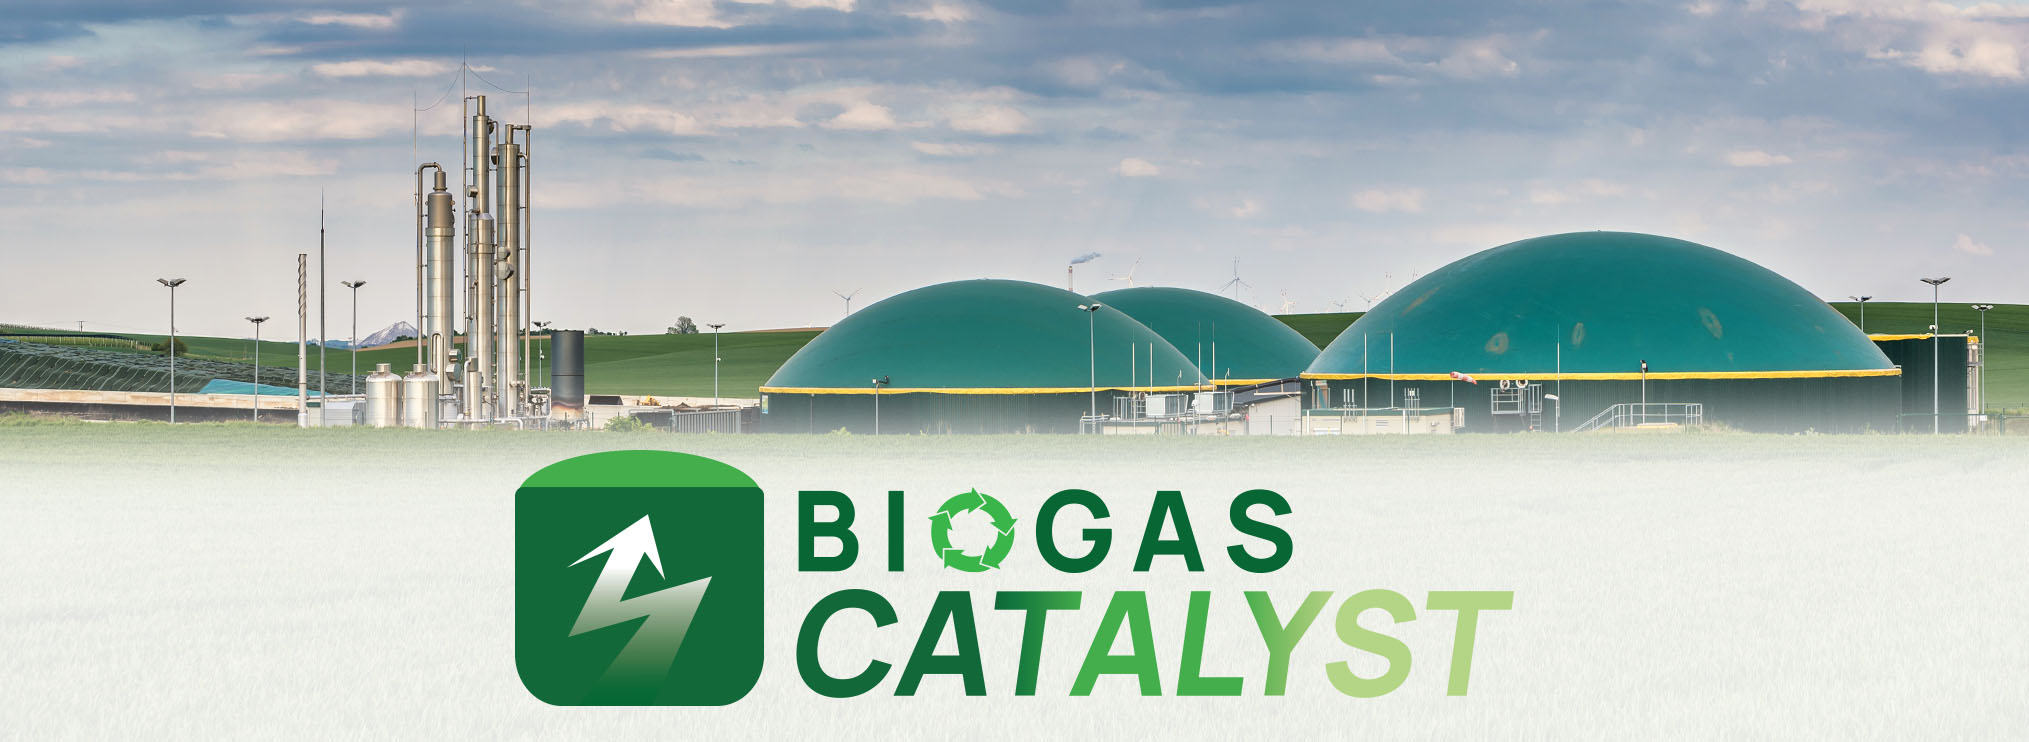 increase biogas production